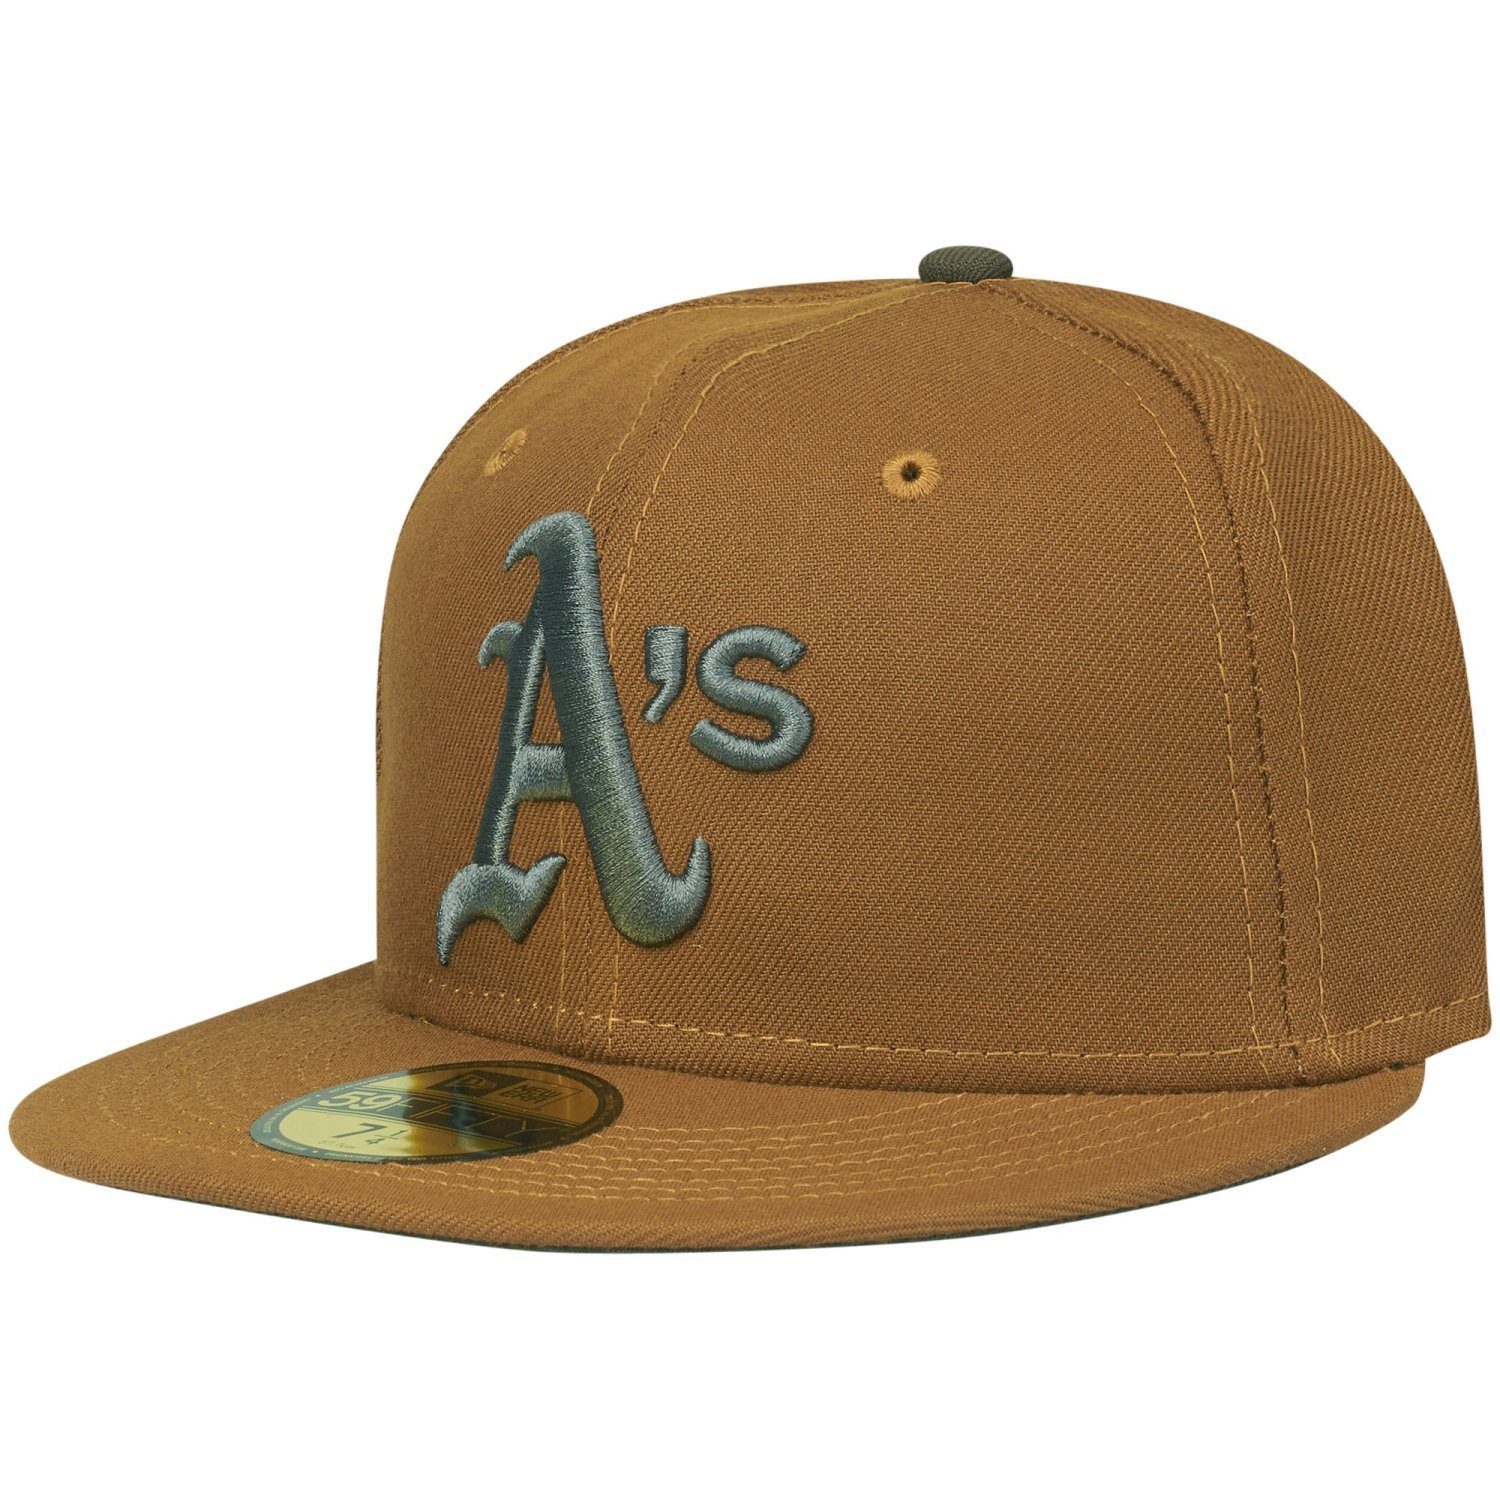 Athletics Era Oakland SERIES New WORLD 59Fifty Fitted Cap 1989